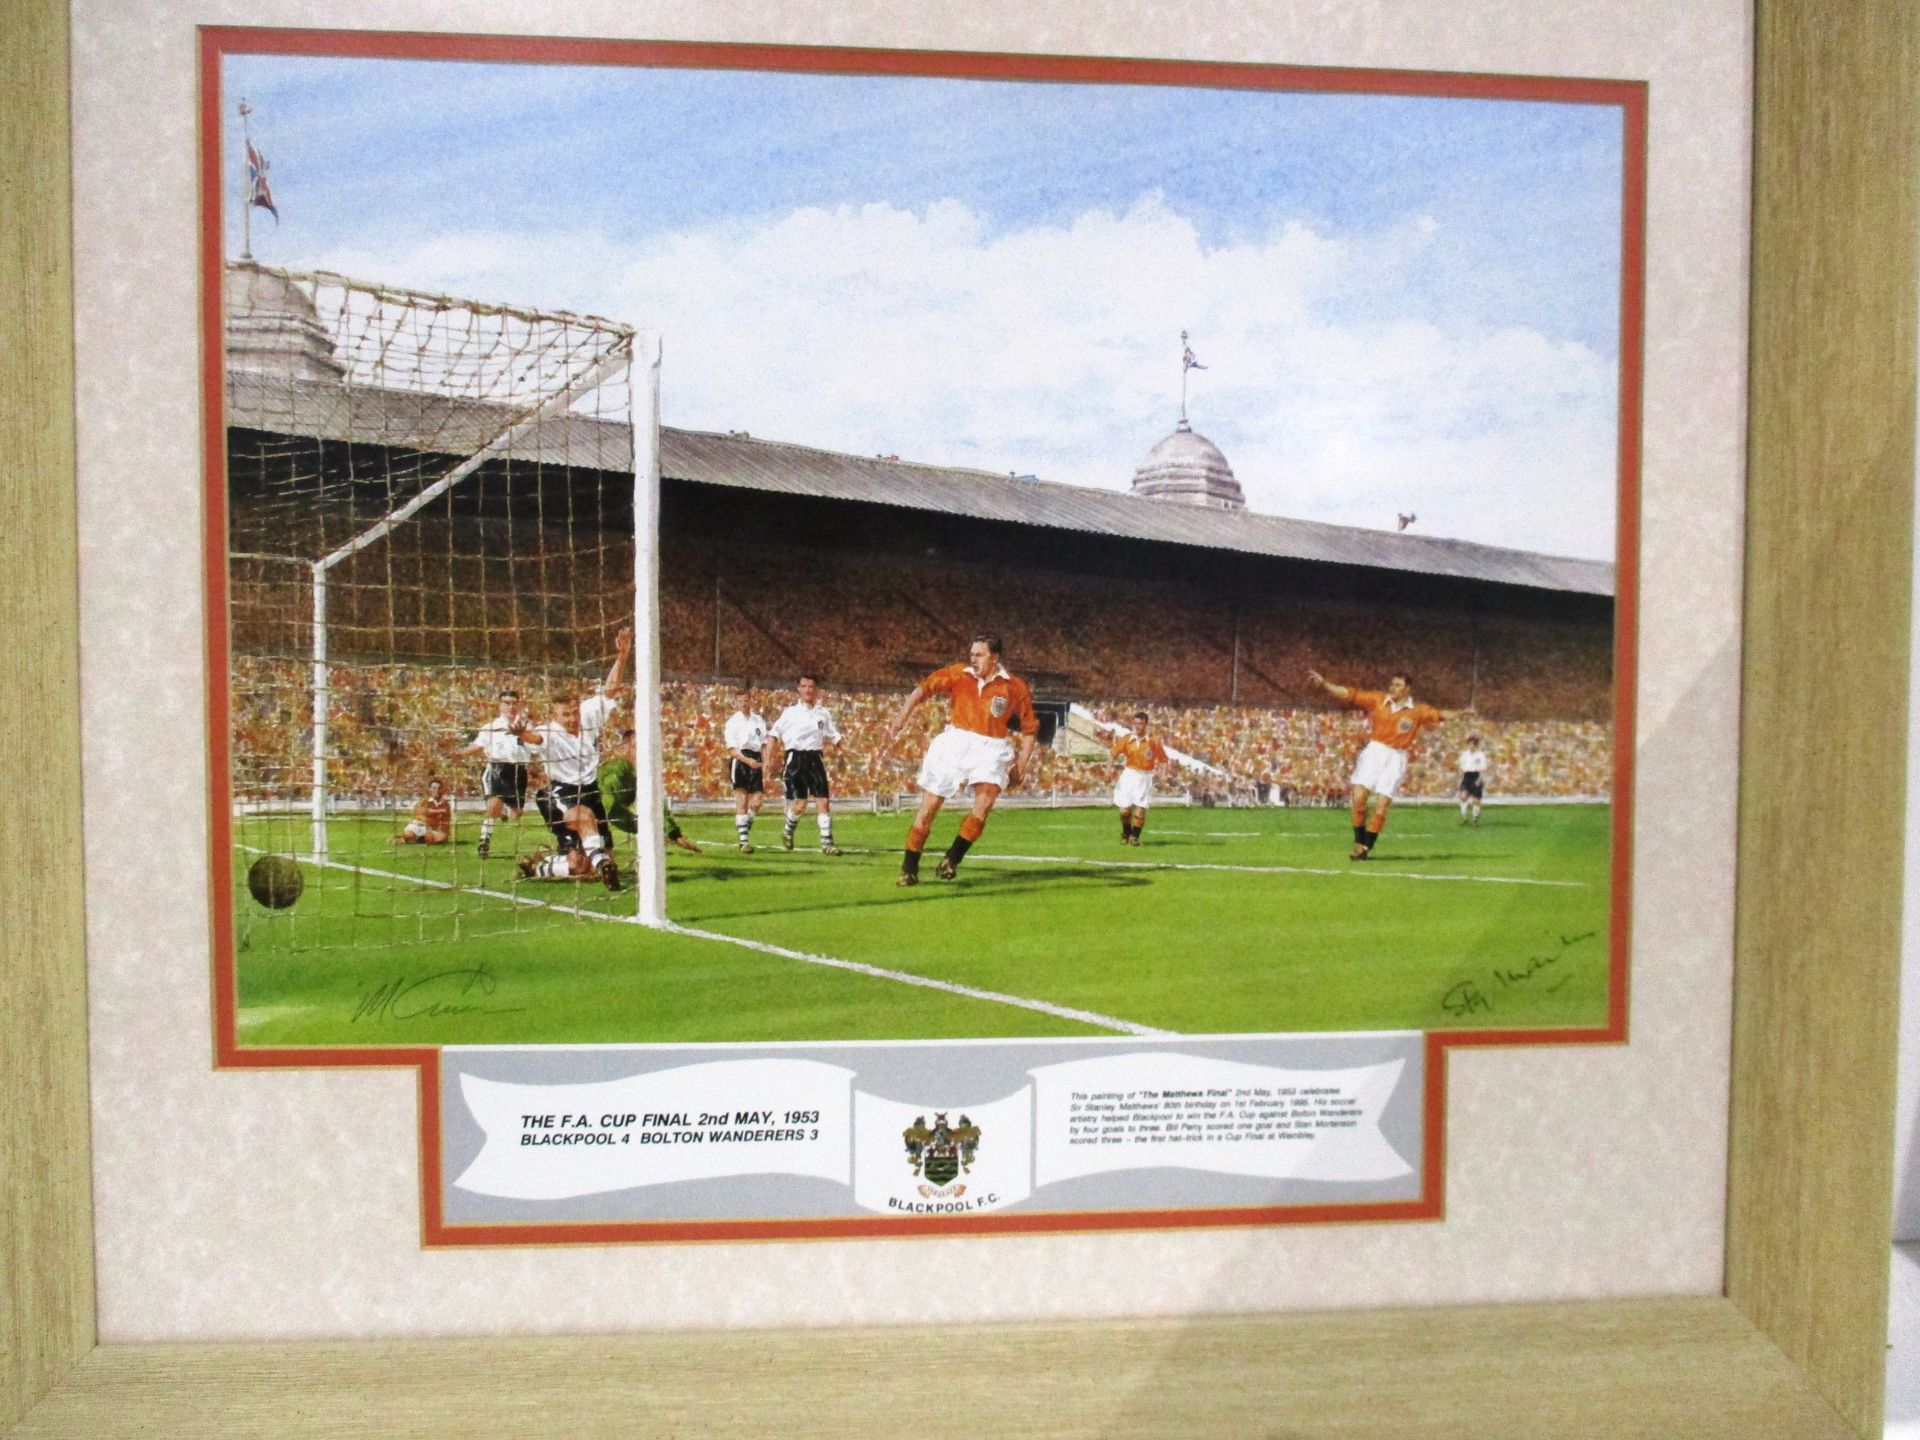 Framed print of the FA Cup Final 2nd May 1953 Blackpool 4 Bolton Wanderers 3 known as the Matthews